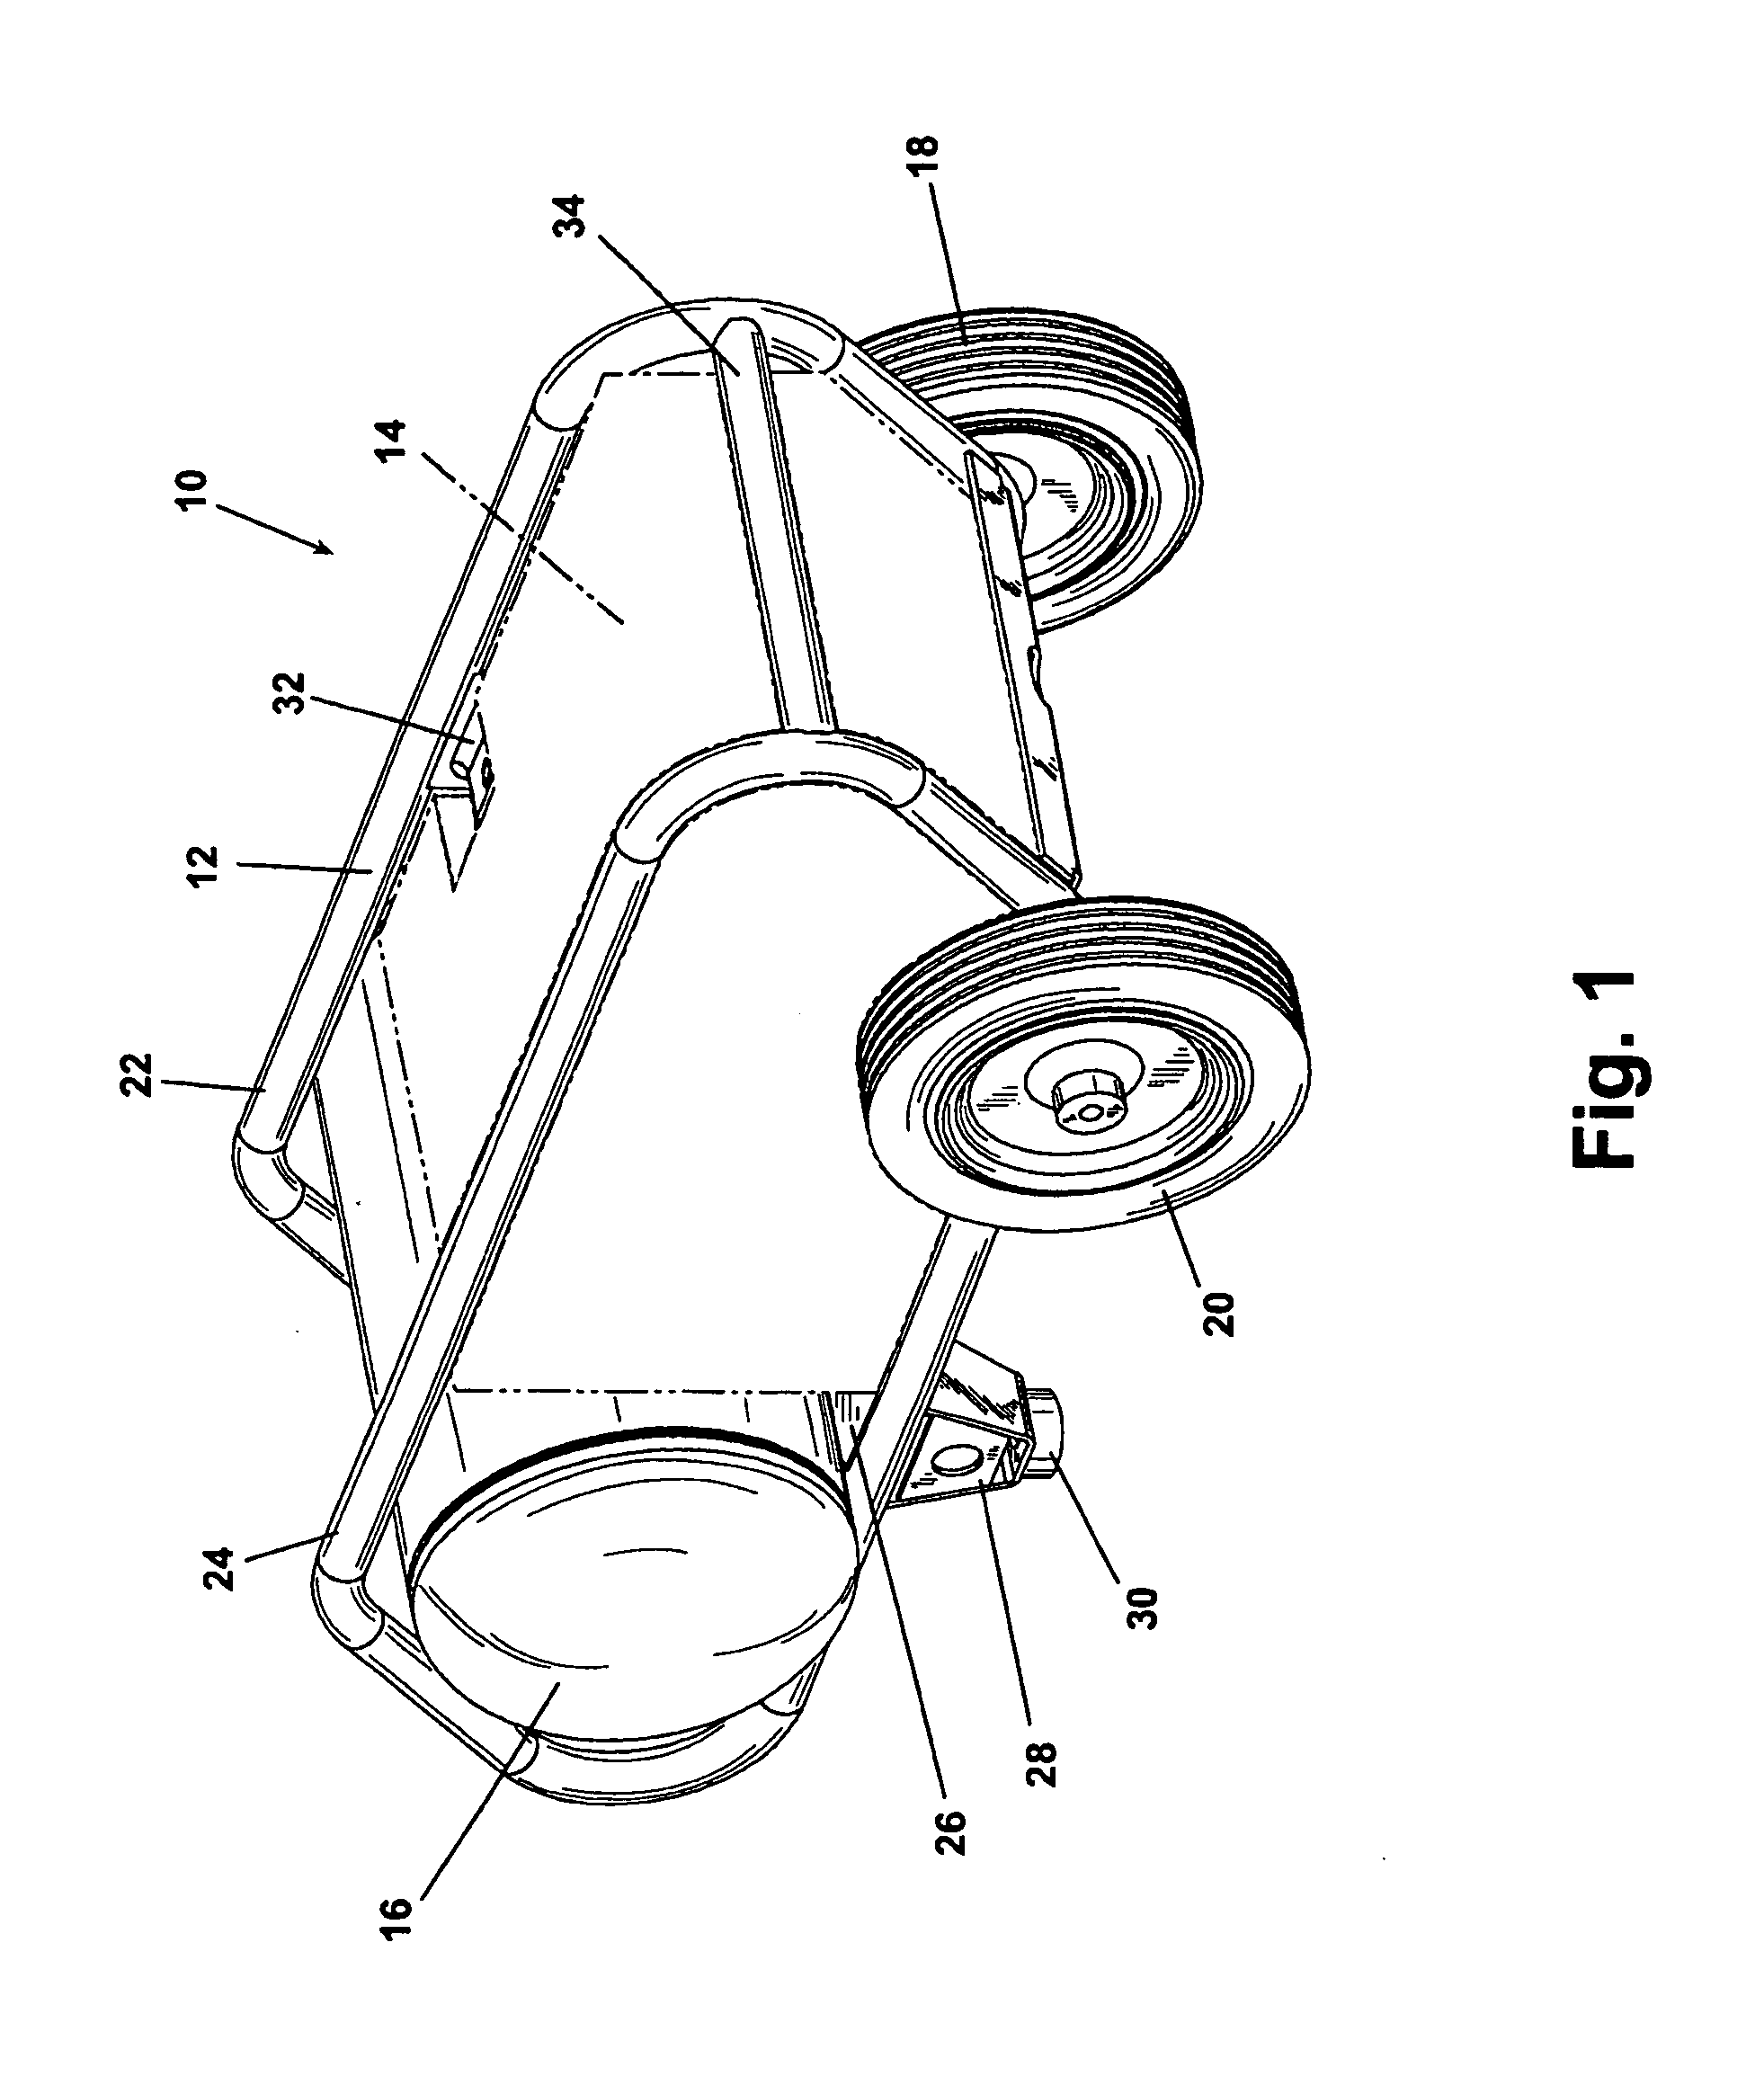 Support structure for a portable air compressor